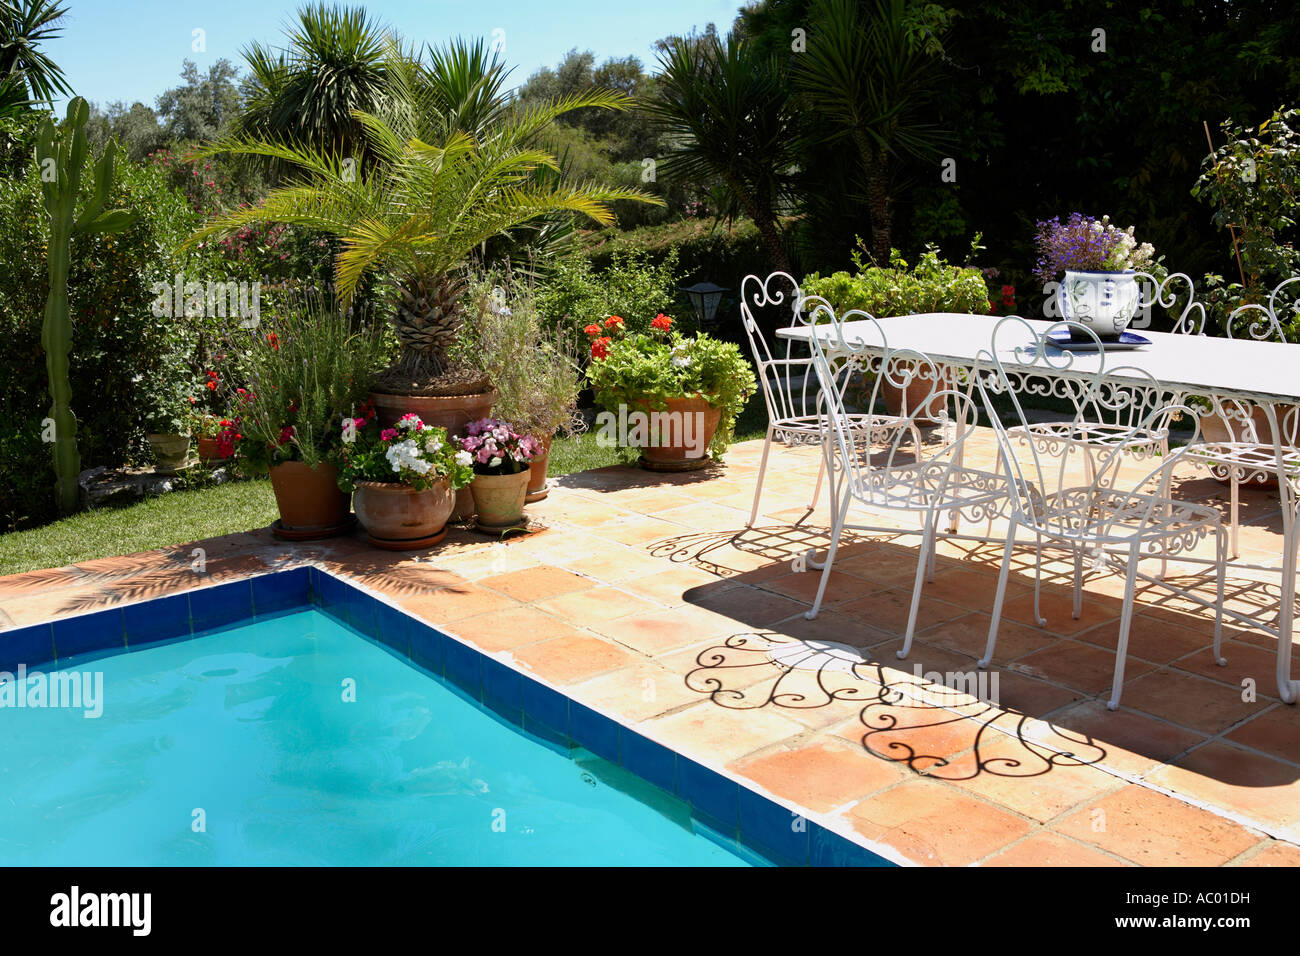 Typical Andalucian Garden View, Marbella, Spain Stock Photo